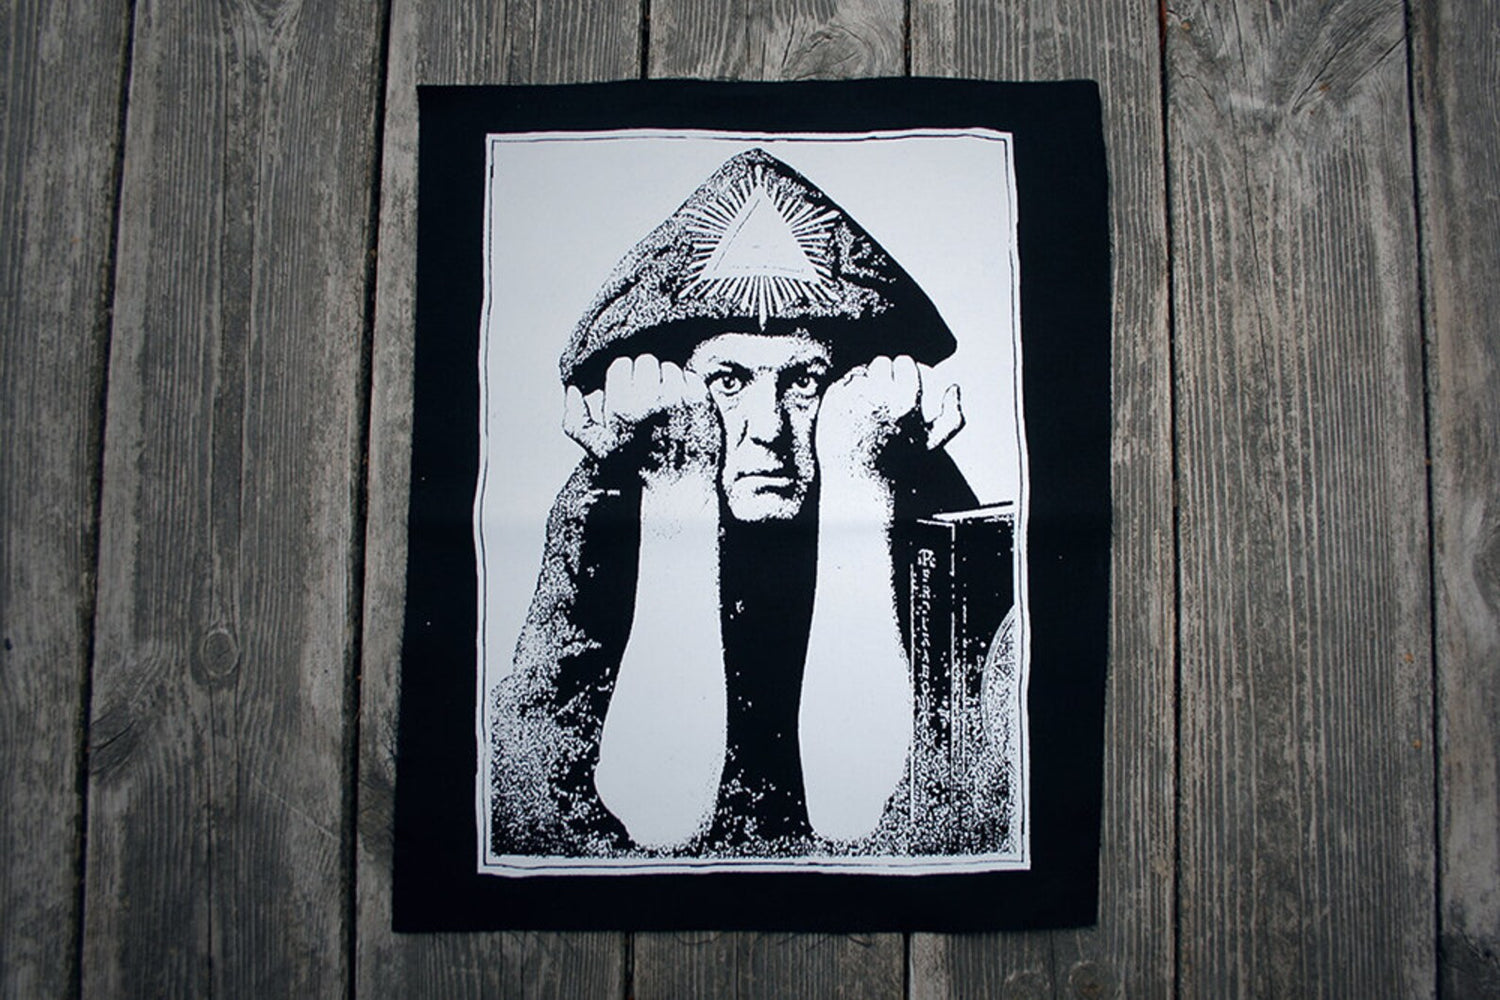 Aleister Crowley backpatch by Torvenius